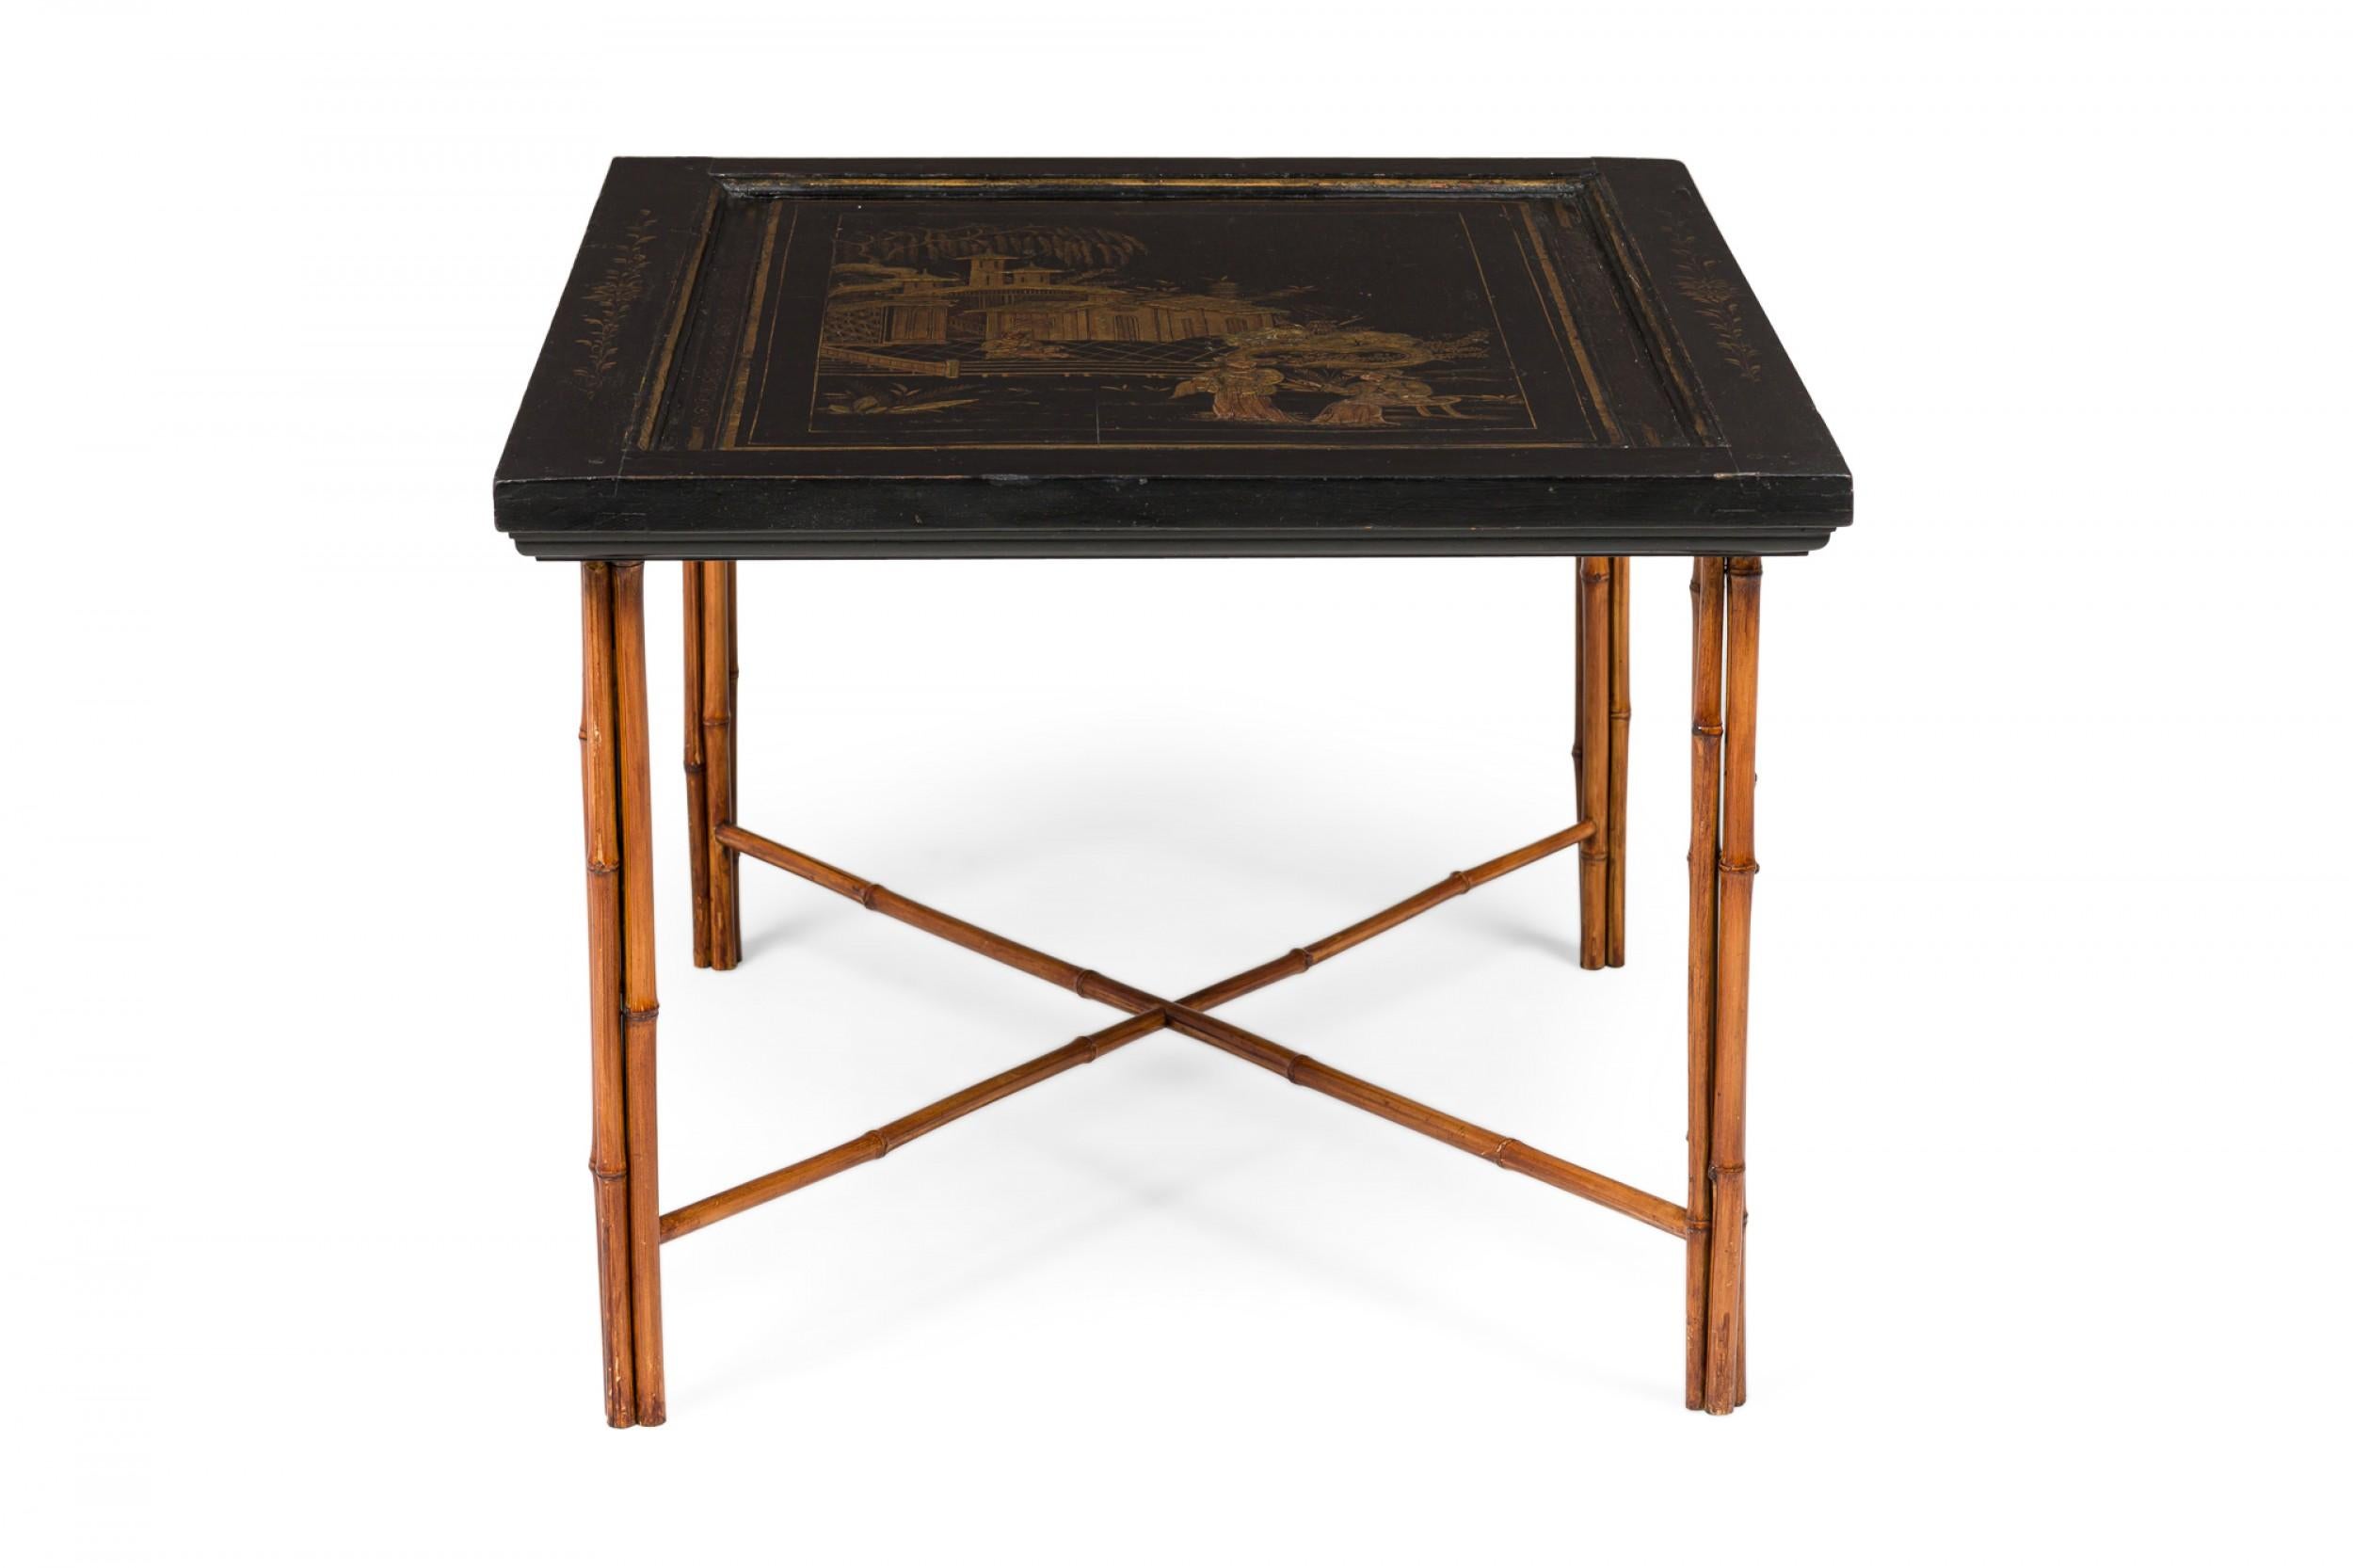 Pair of similar Chinese end tables with black lacquered panel tops (19th Century) having figural and parcel gilt highlights within an inset painted floral border resting on bamboo cluster legs connected by an X-stretcher. (PRICED AS PAIR) (Prov: